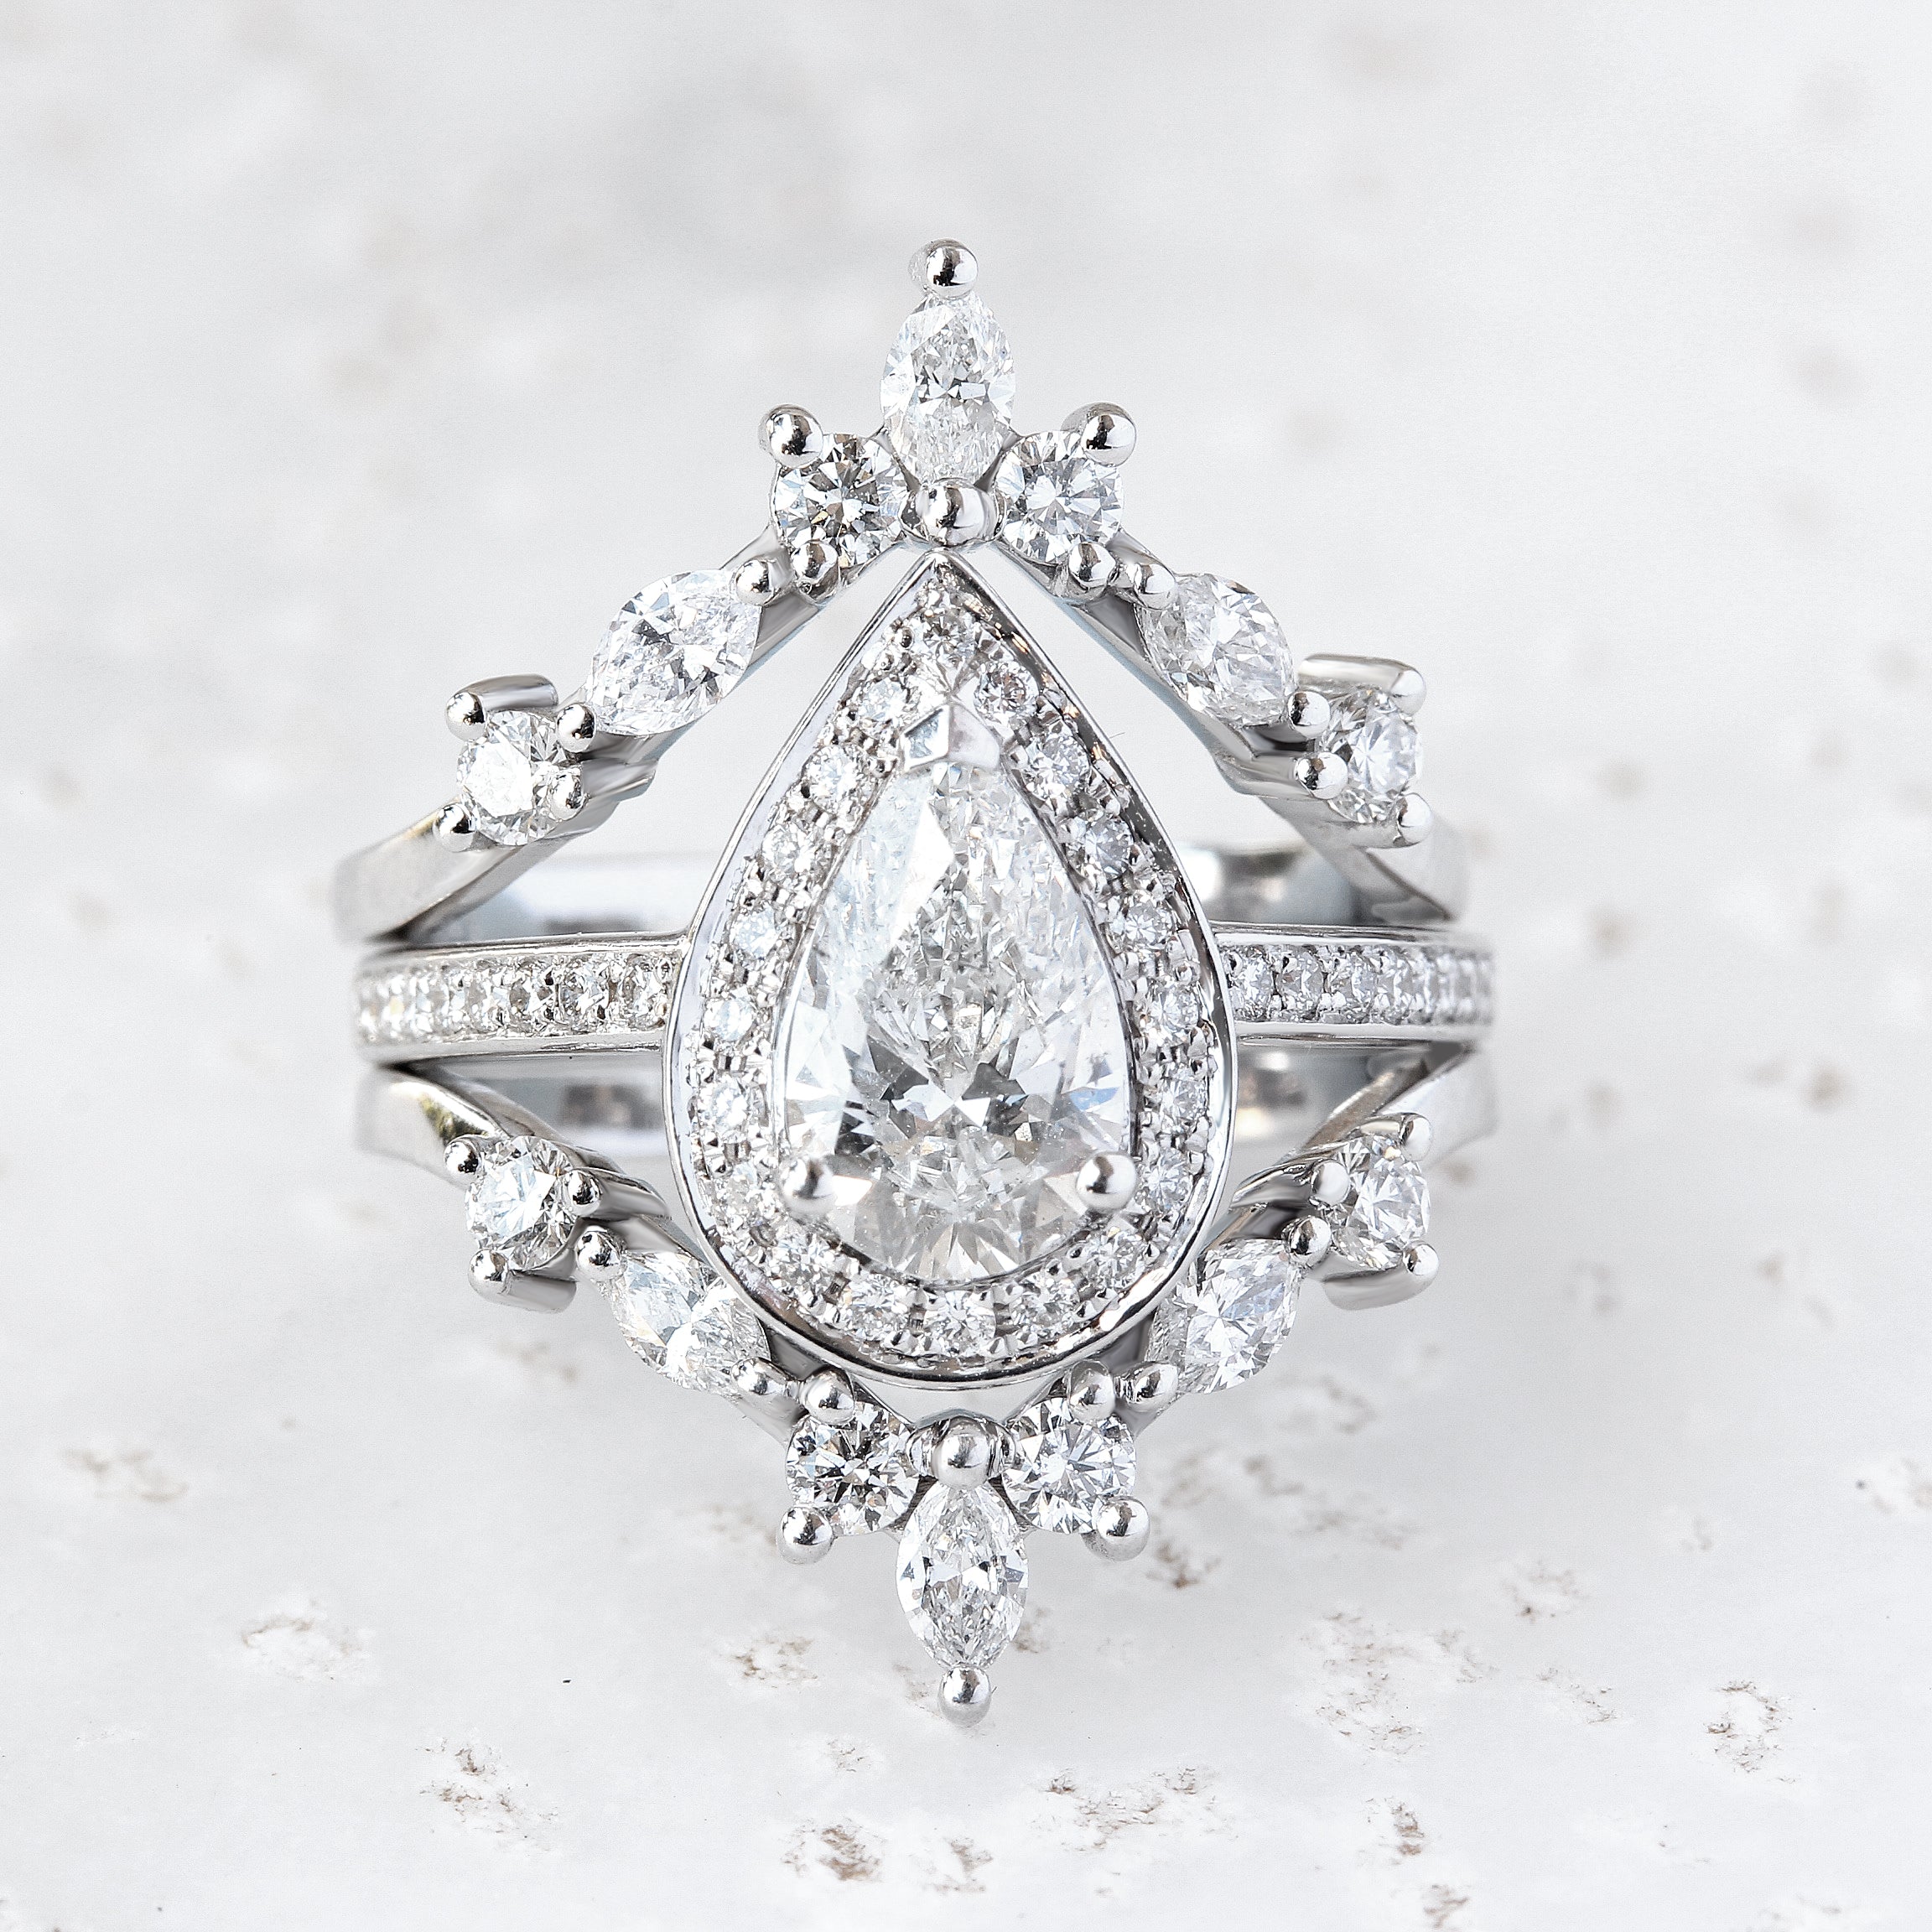 Pear diamond Halo Engagement Ring with two Hermes nesting rings, Nia ♥